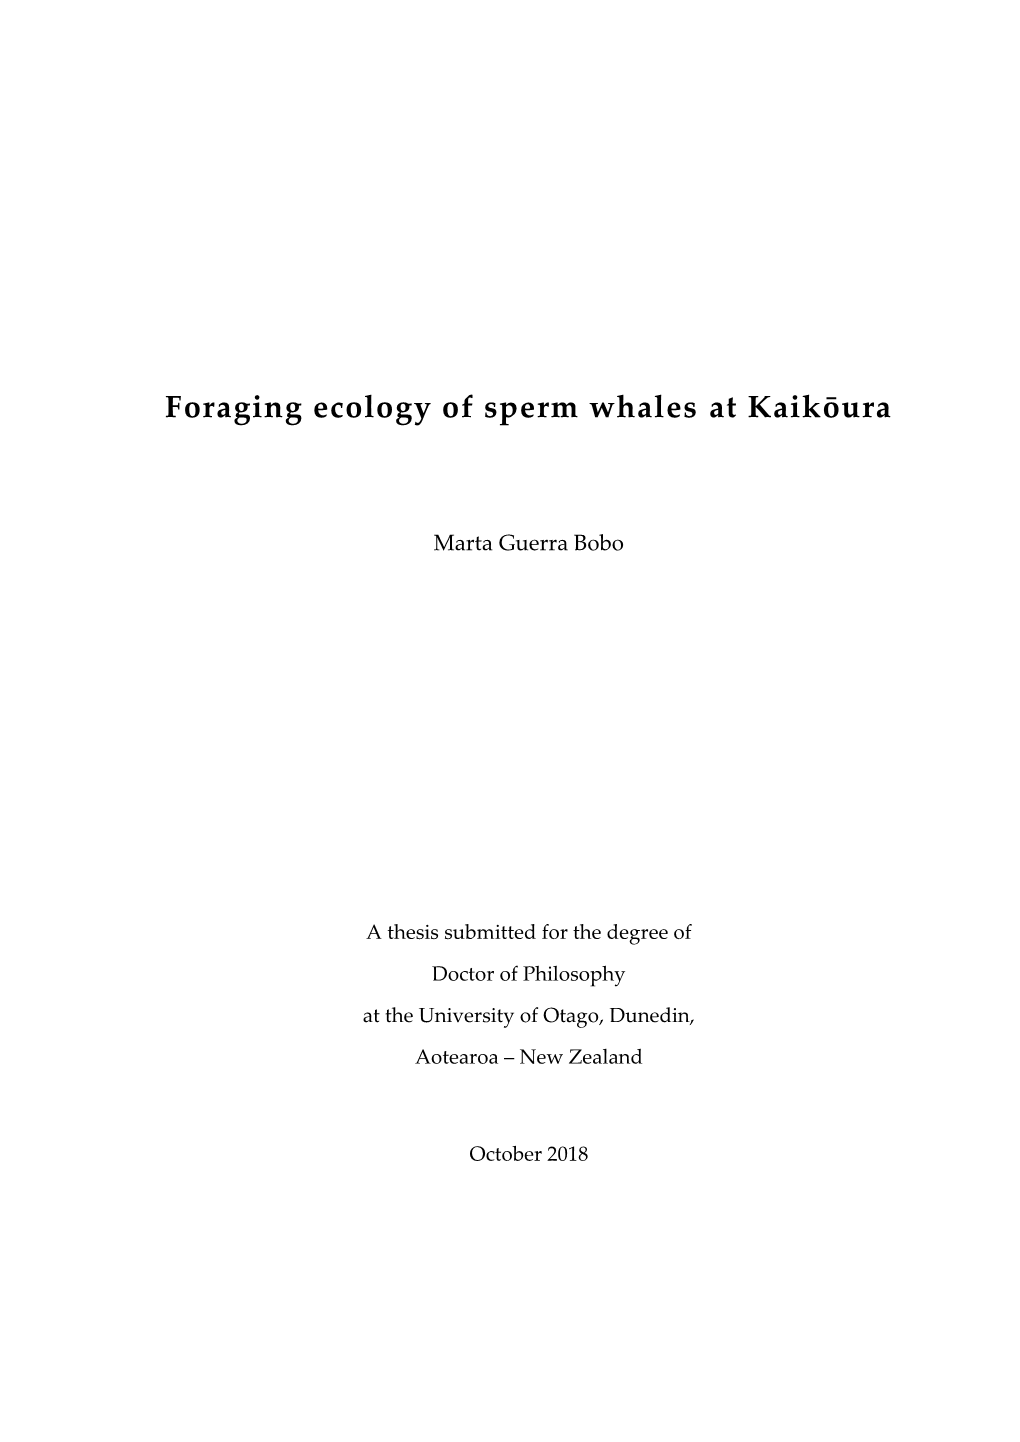 Foraging Ecology of Sperm Whales at Kaikoura (Phd Thesis)